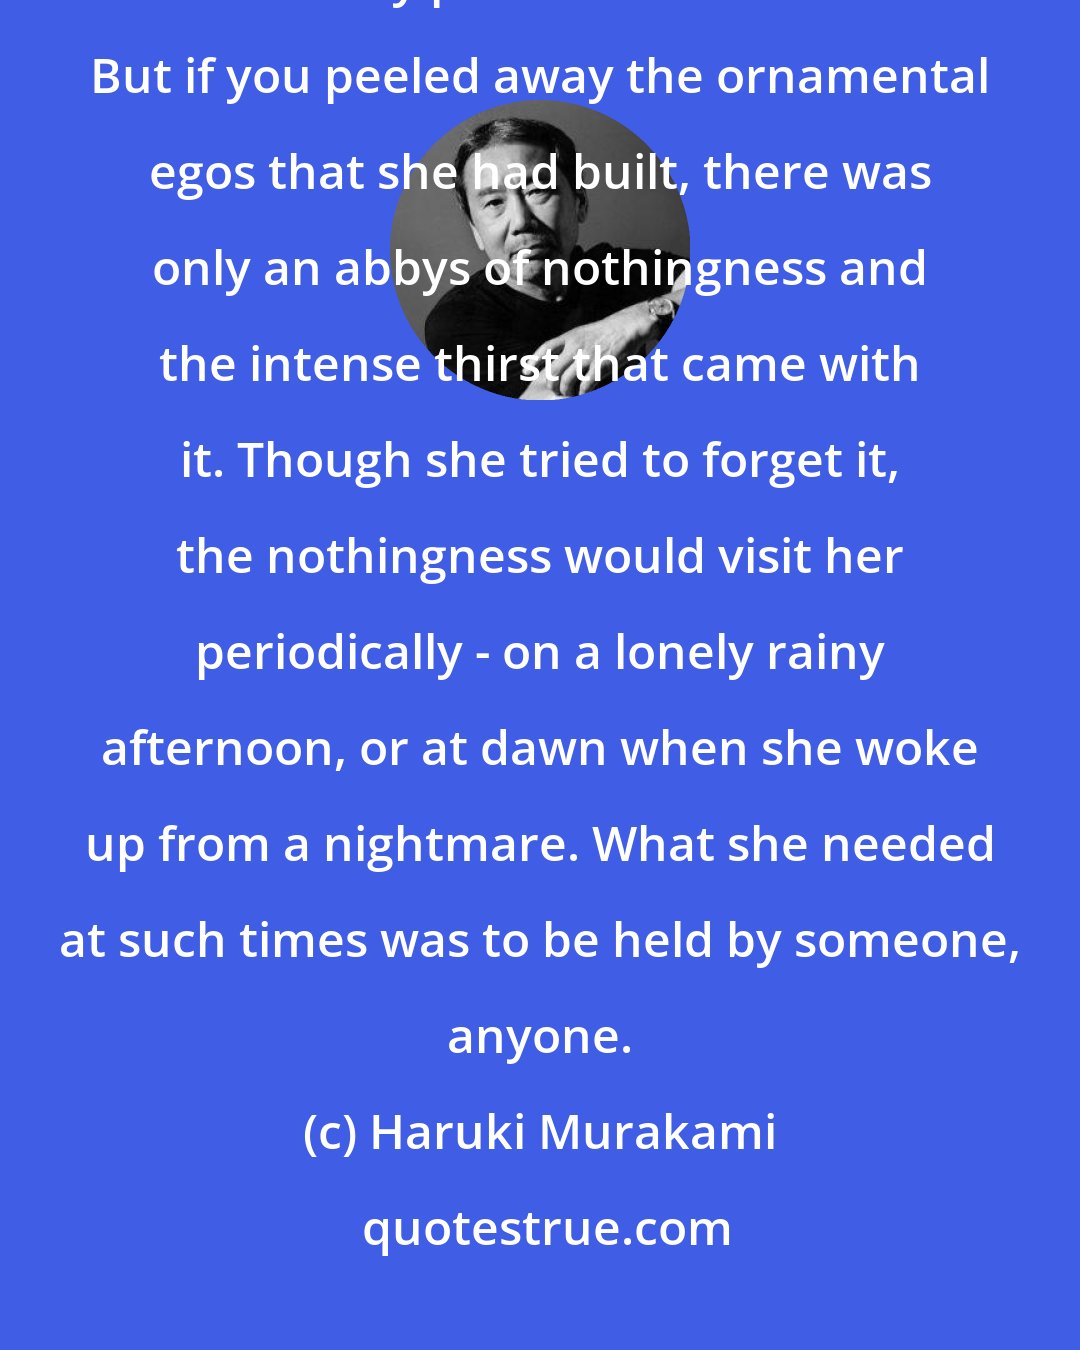 Haruki Murakami: As if to build a fence around the fatal emptiness inside her, she had to create a sunny person that she became. But if you peeled away the ornamental egos that she had built, there was only an abbys of nothingness and the intense thirst that came with it. Though she tried to forget it, the nothingness would visit her periodically - on a lonely rainy afternoon, or at dawn when she woke up from a nightmare. What she needed at such times was to be held by someone, anyone.